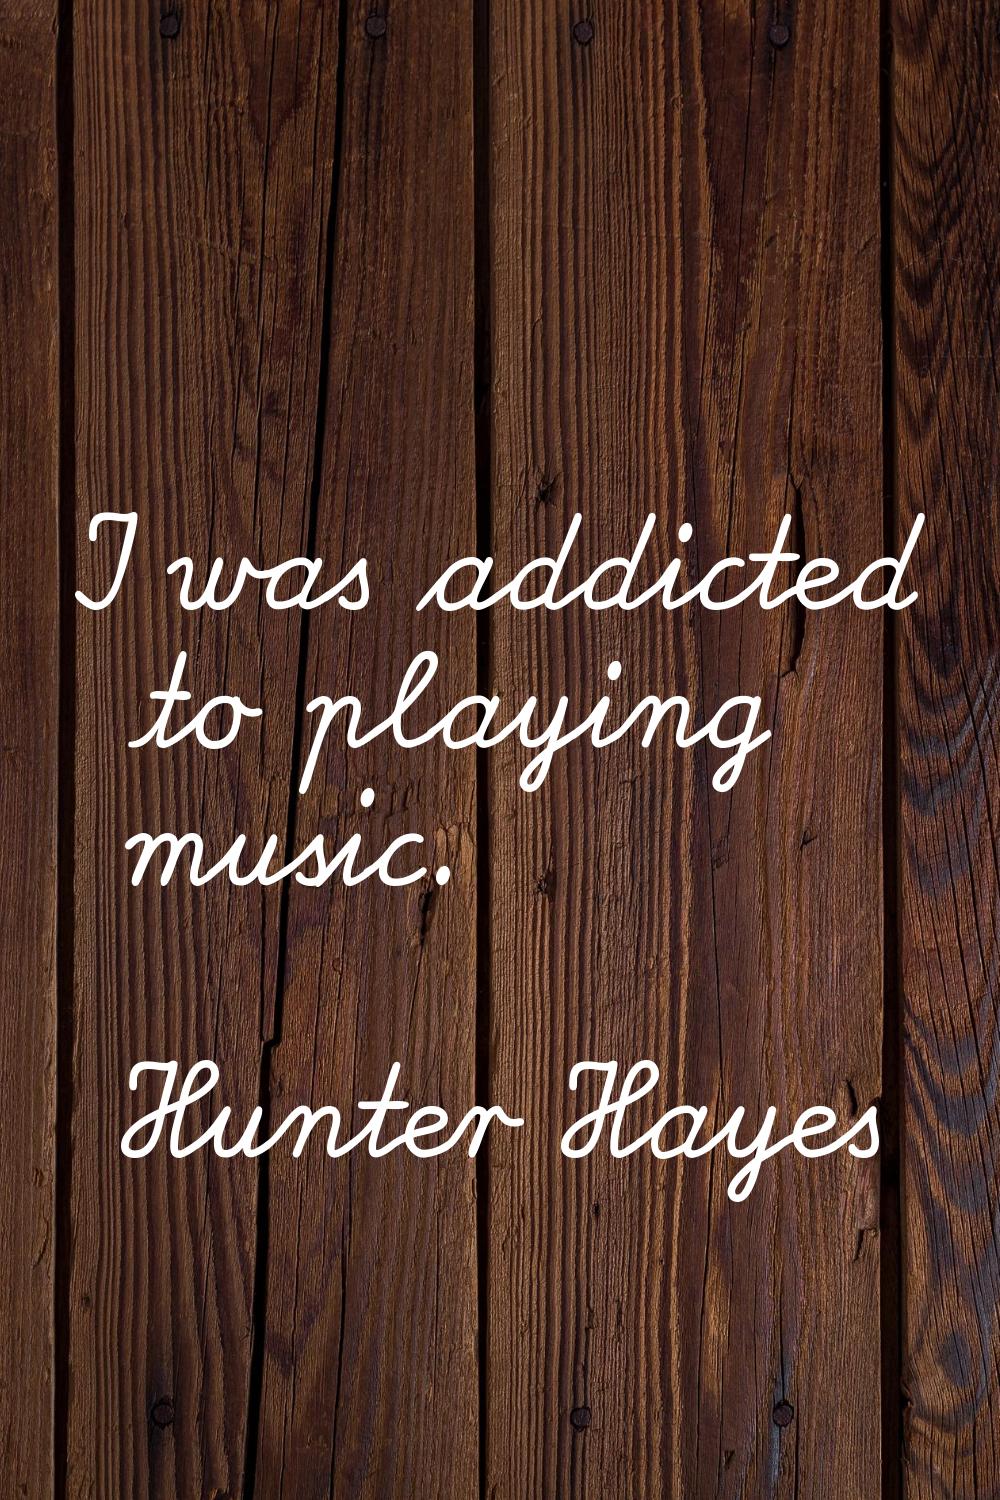 I was addicted to playing music.